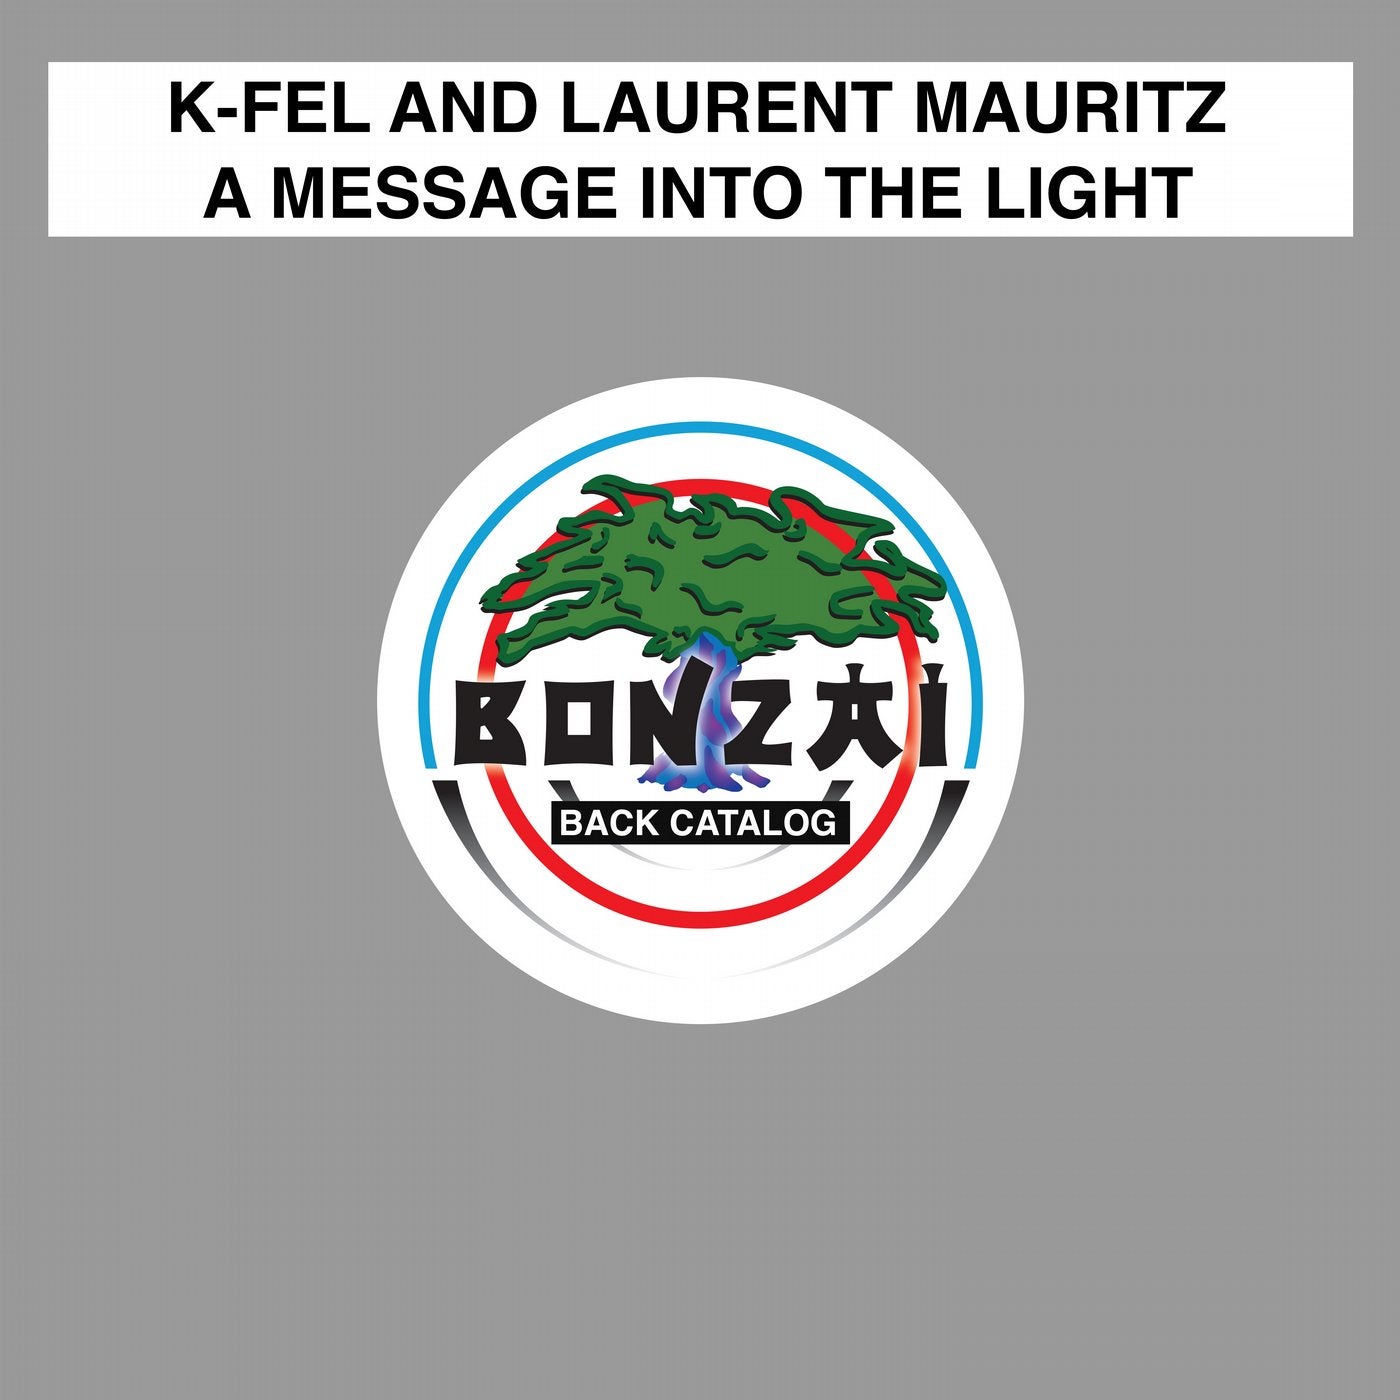 A Message Into The Light